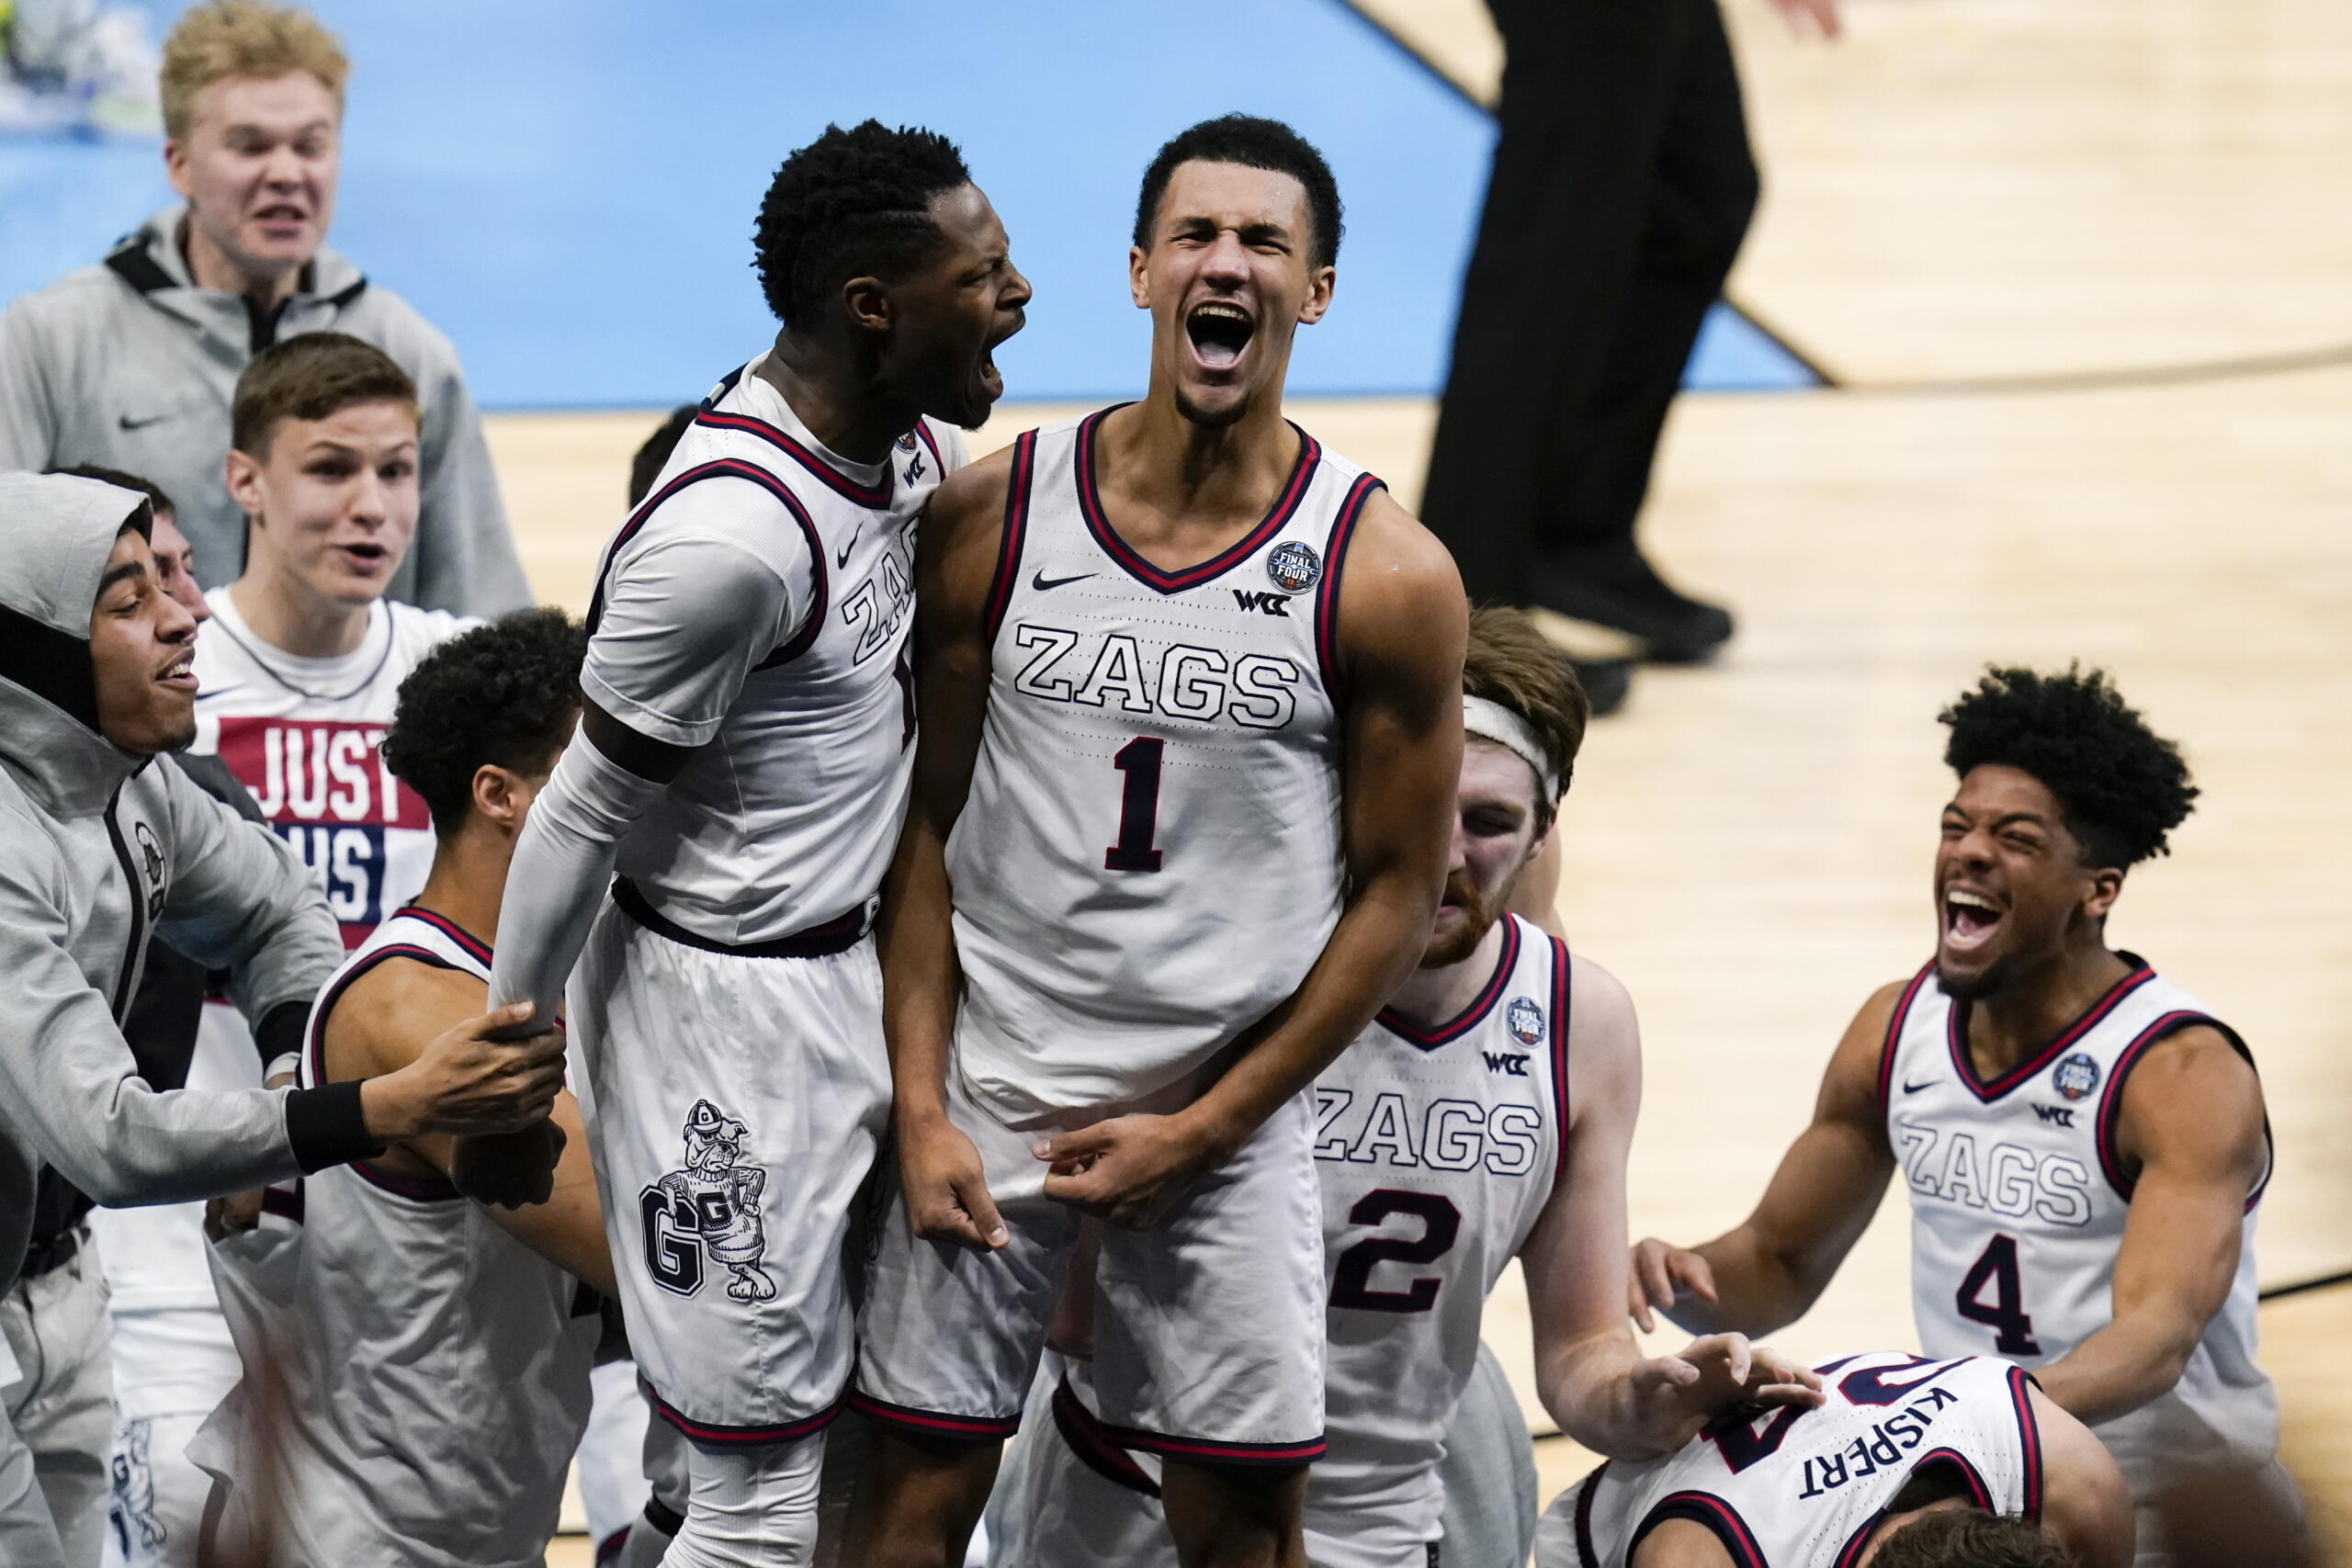 Gonzaga guard Jalen Suggs (1) celebrates making the game winning basket with Joel Ayayi, left, against UCLA during overtime in a men's Final Four NCAA college basketball tournament semifinal game, Saturday, April 3, 2021, at Lucas Oil Stadium in Indianapolis. Gonzaga won 93-90.